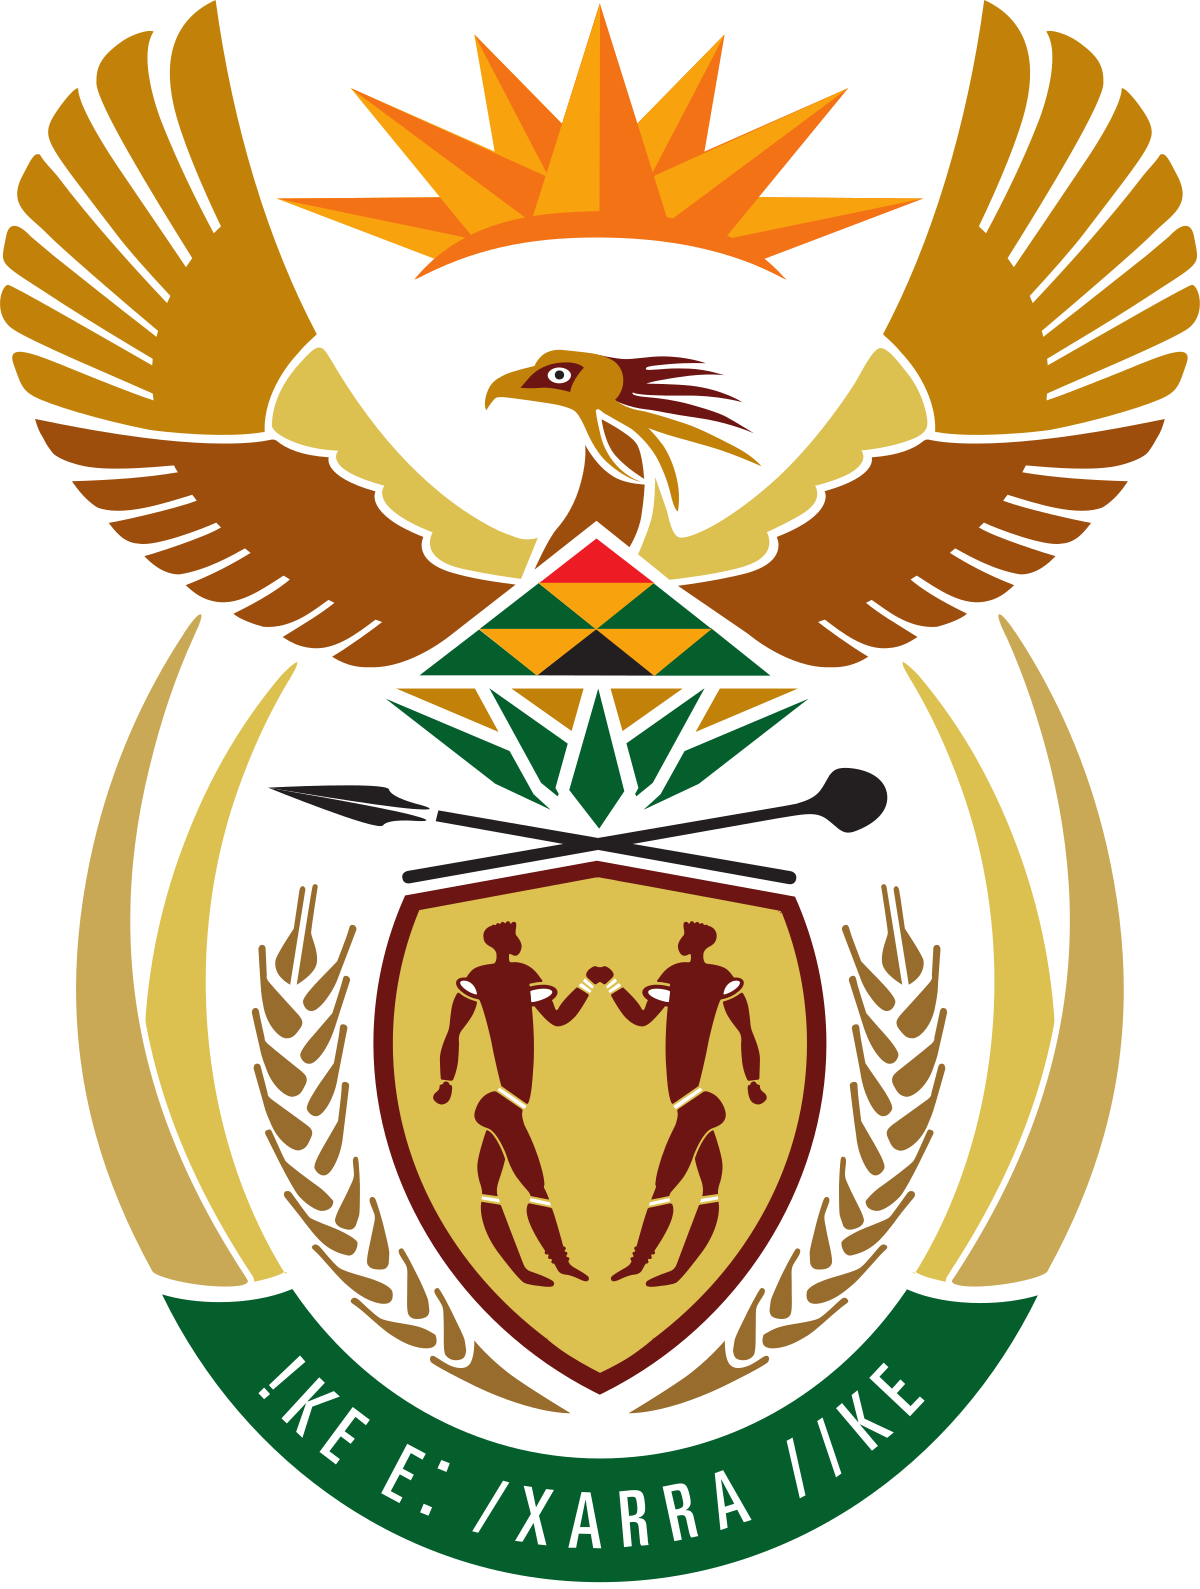 South African National Government crest